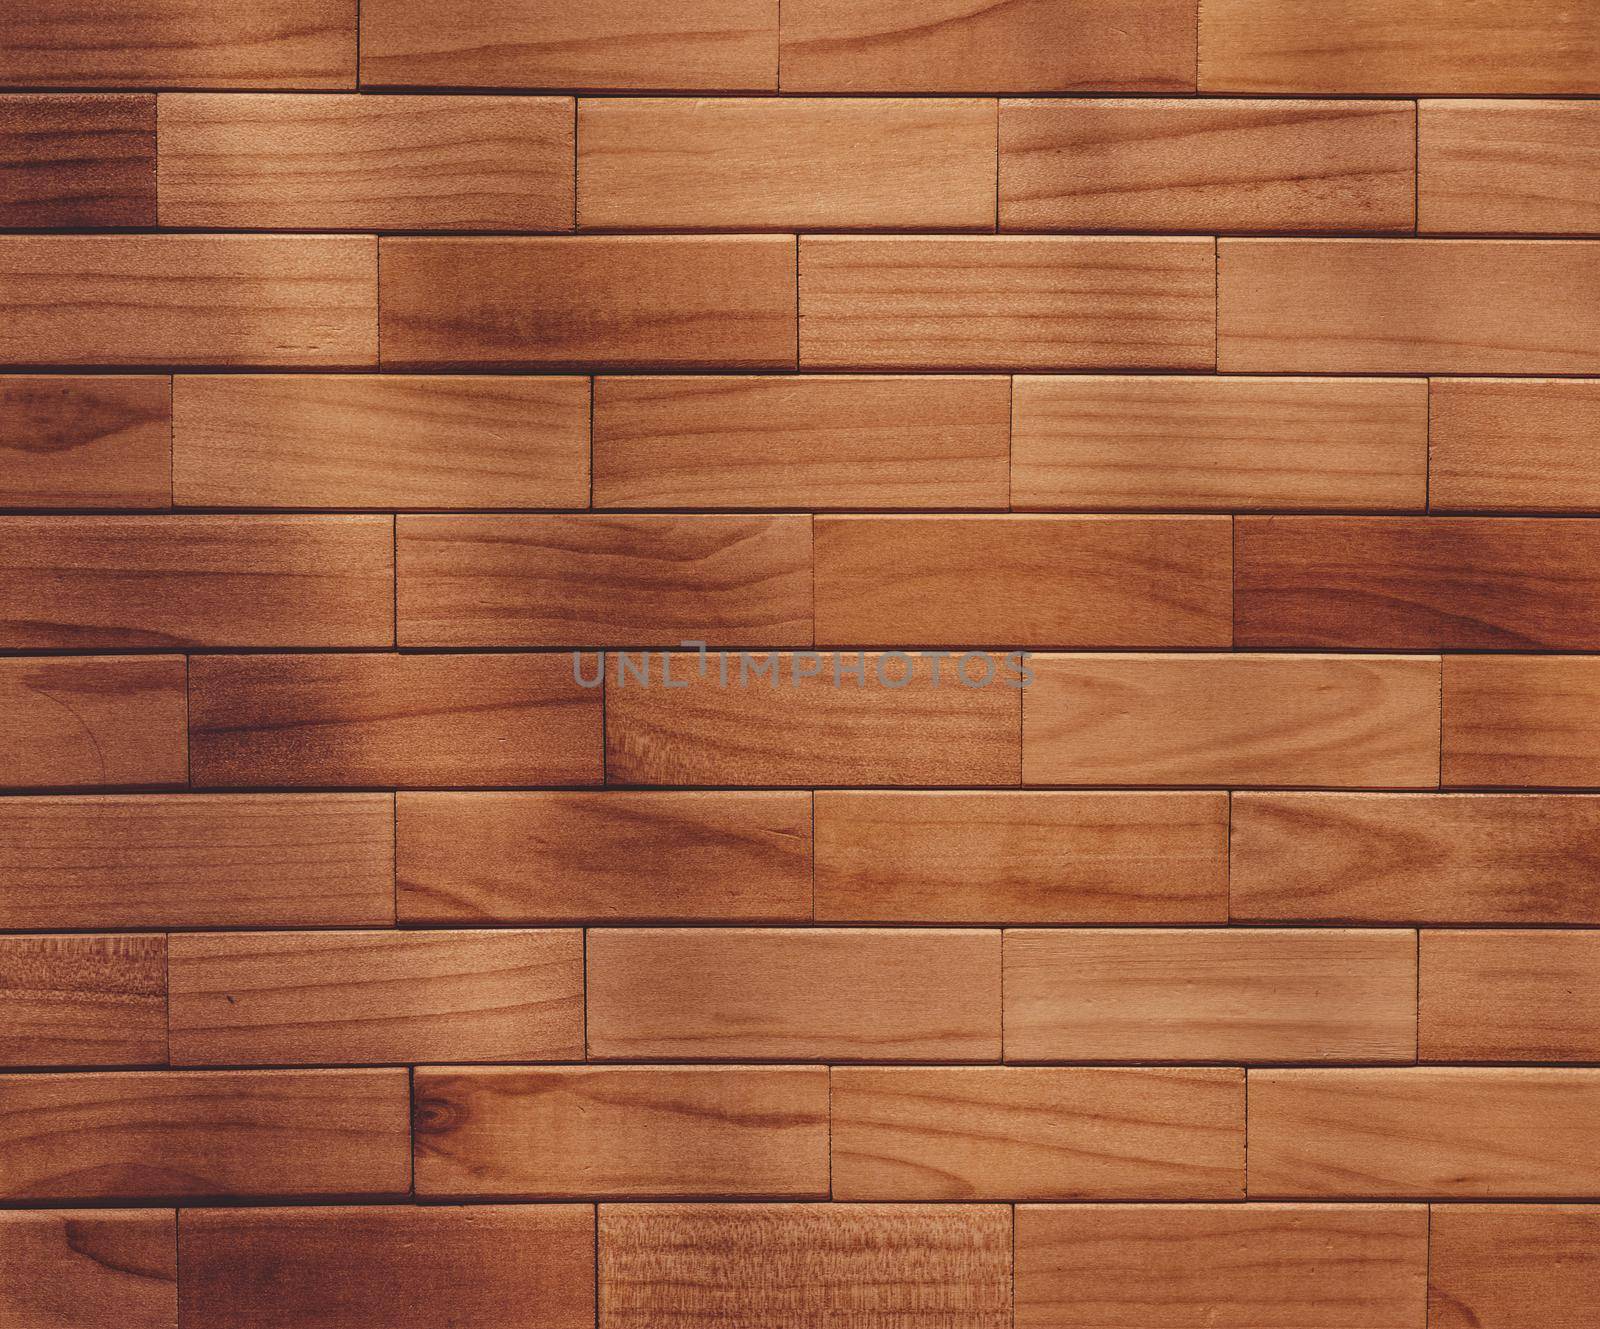 Wooden geometric texture from rectangle blocks